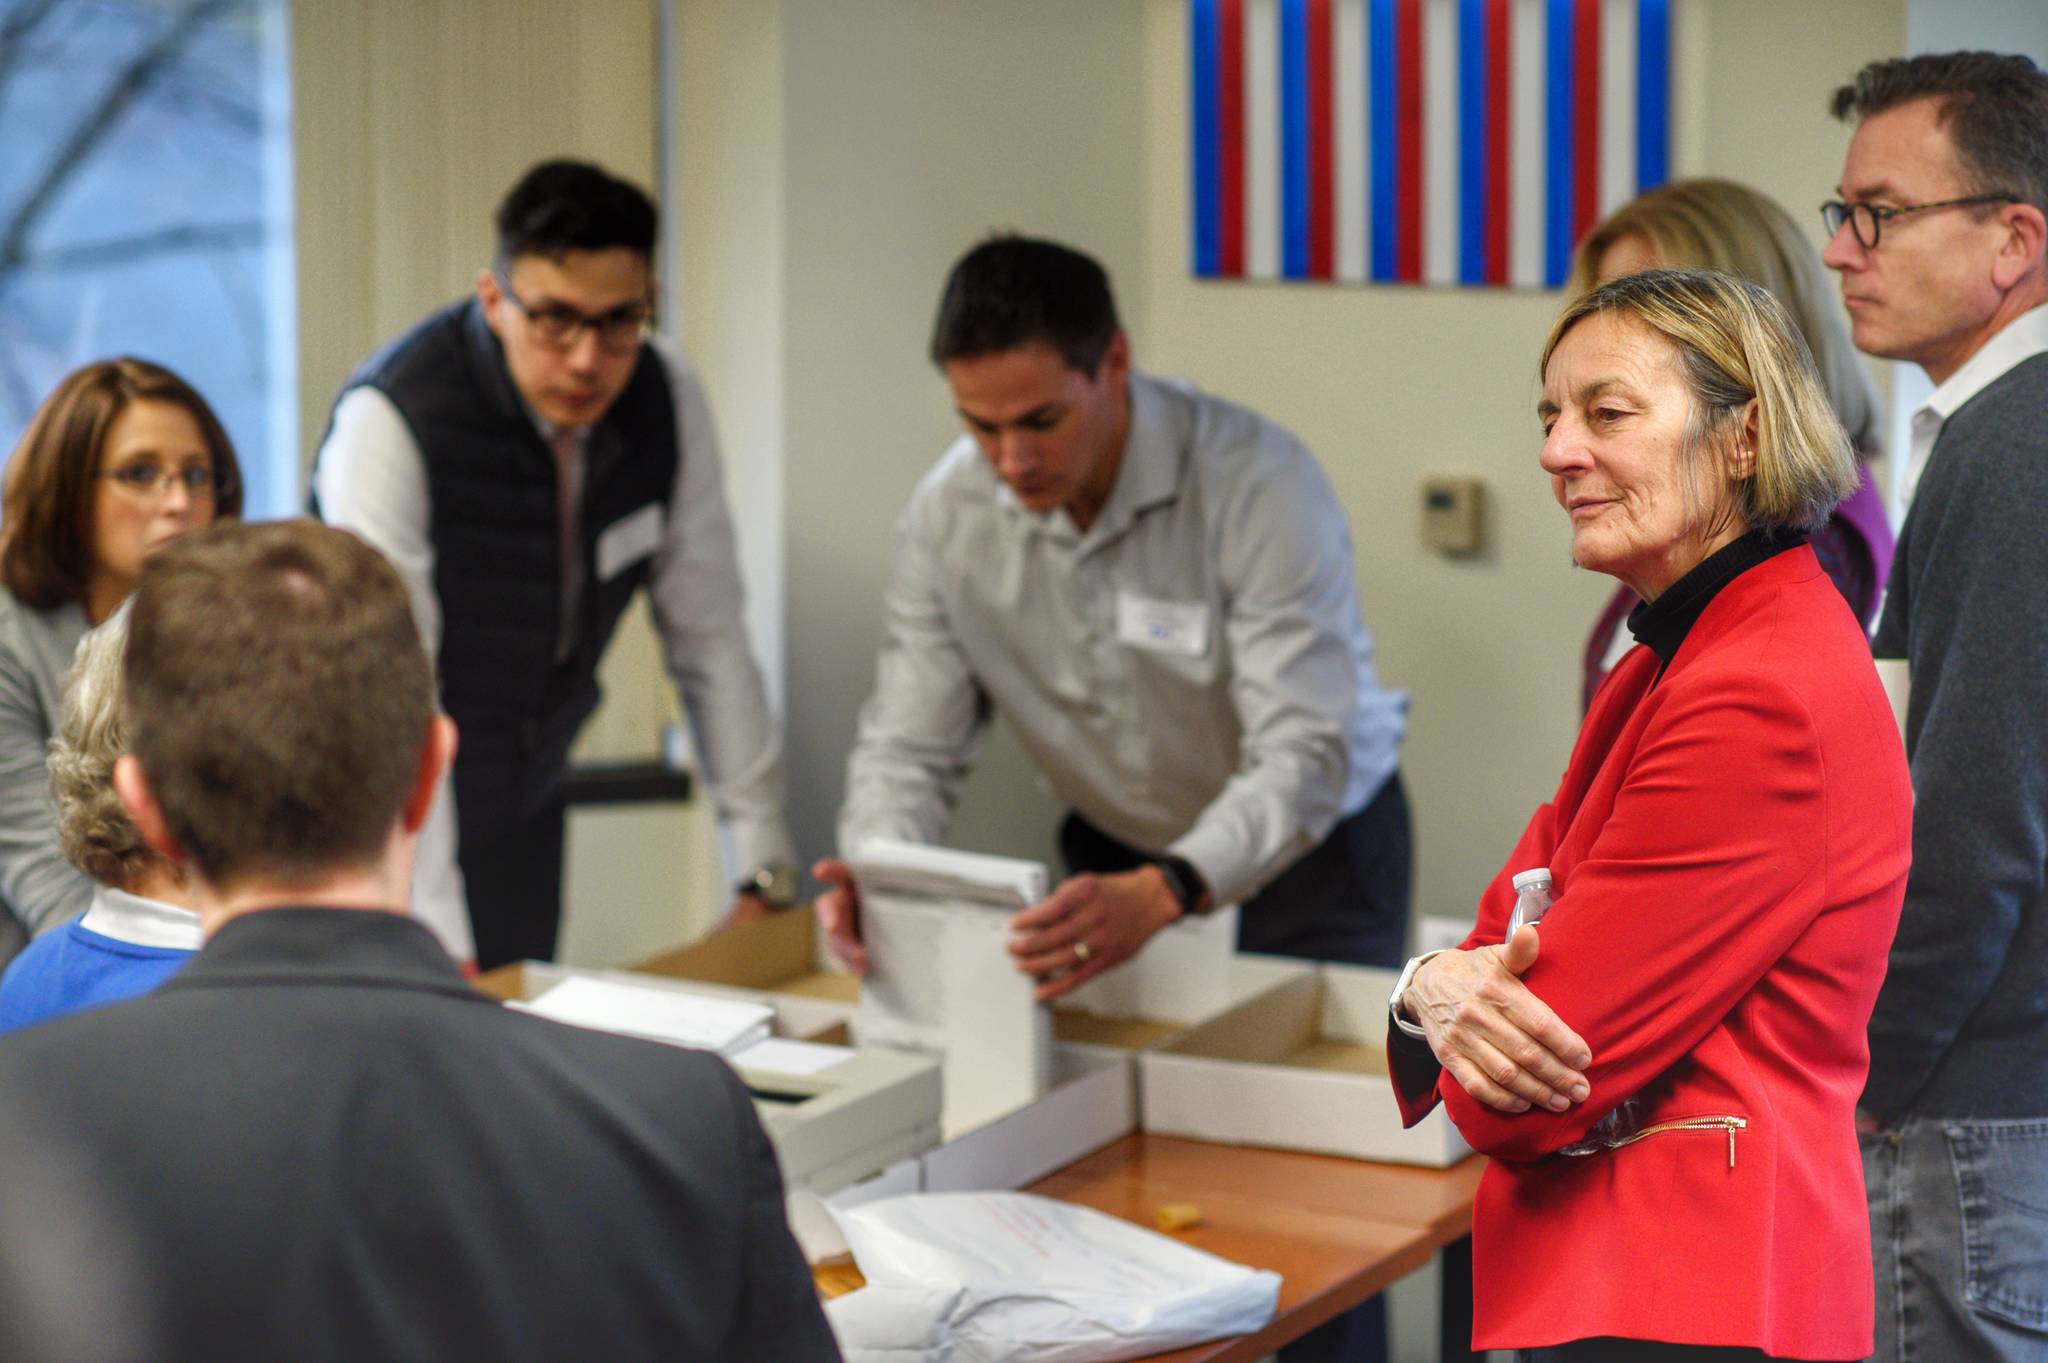 House District 1 Democratic candidate Kathryn Dodge watches as ballots are counted during a recount at the Division of Elections office in Juneau on Friday, Nov. 30, 2018. (Michael Penn | Juneau Empire)